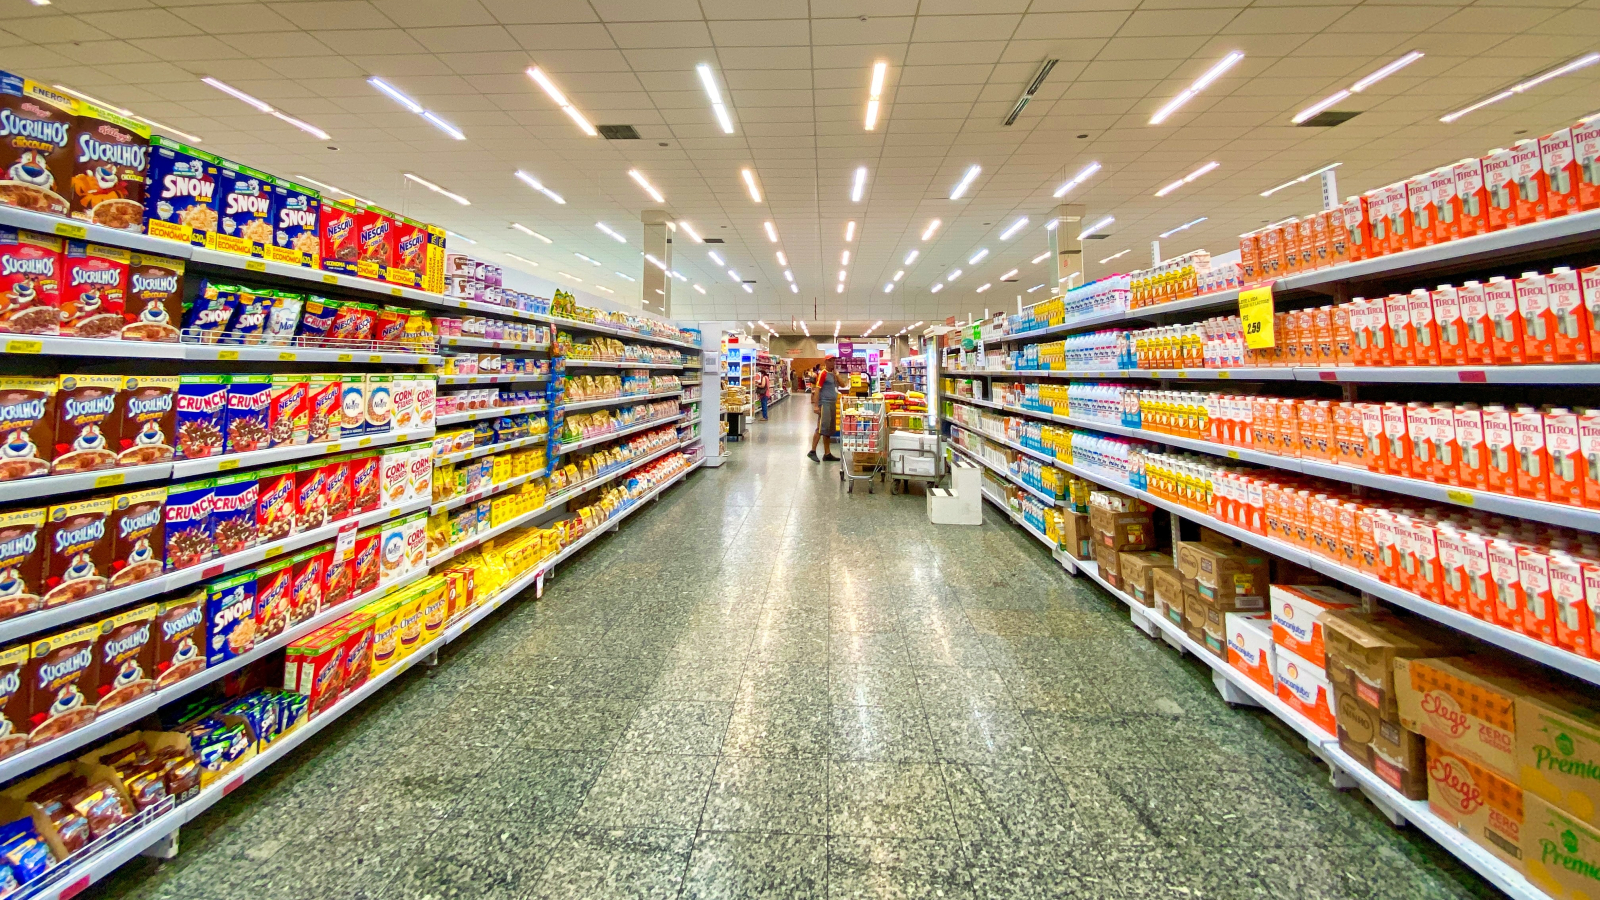 The Pros and Cons of the Endless Aisle - SmartOSC